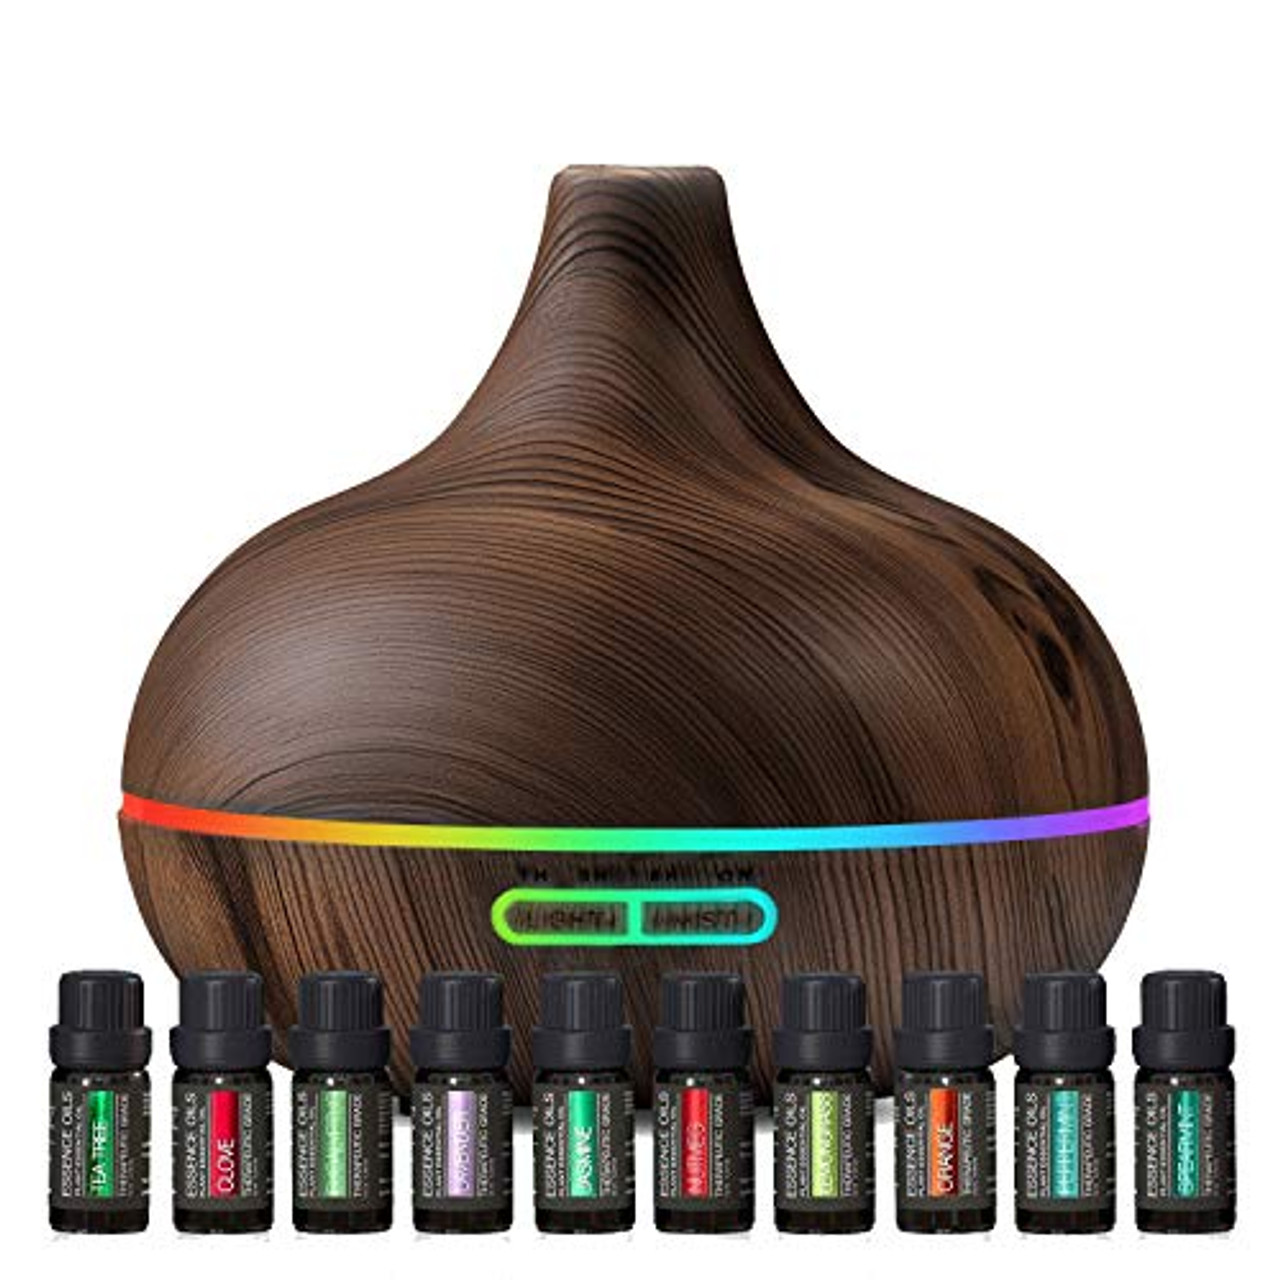 Buy Essential Oil Sets For Diffuser